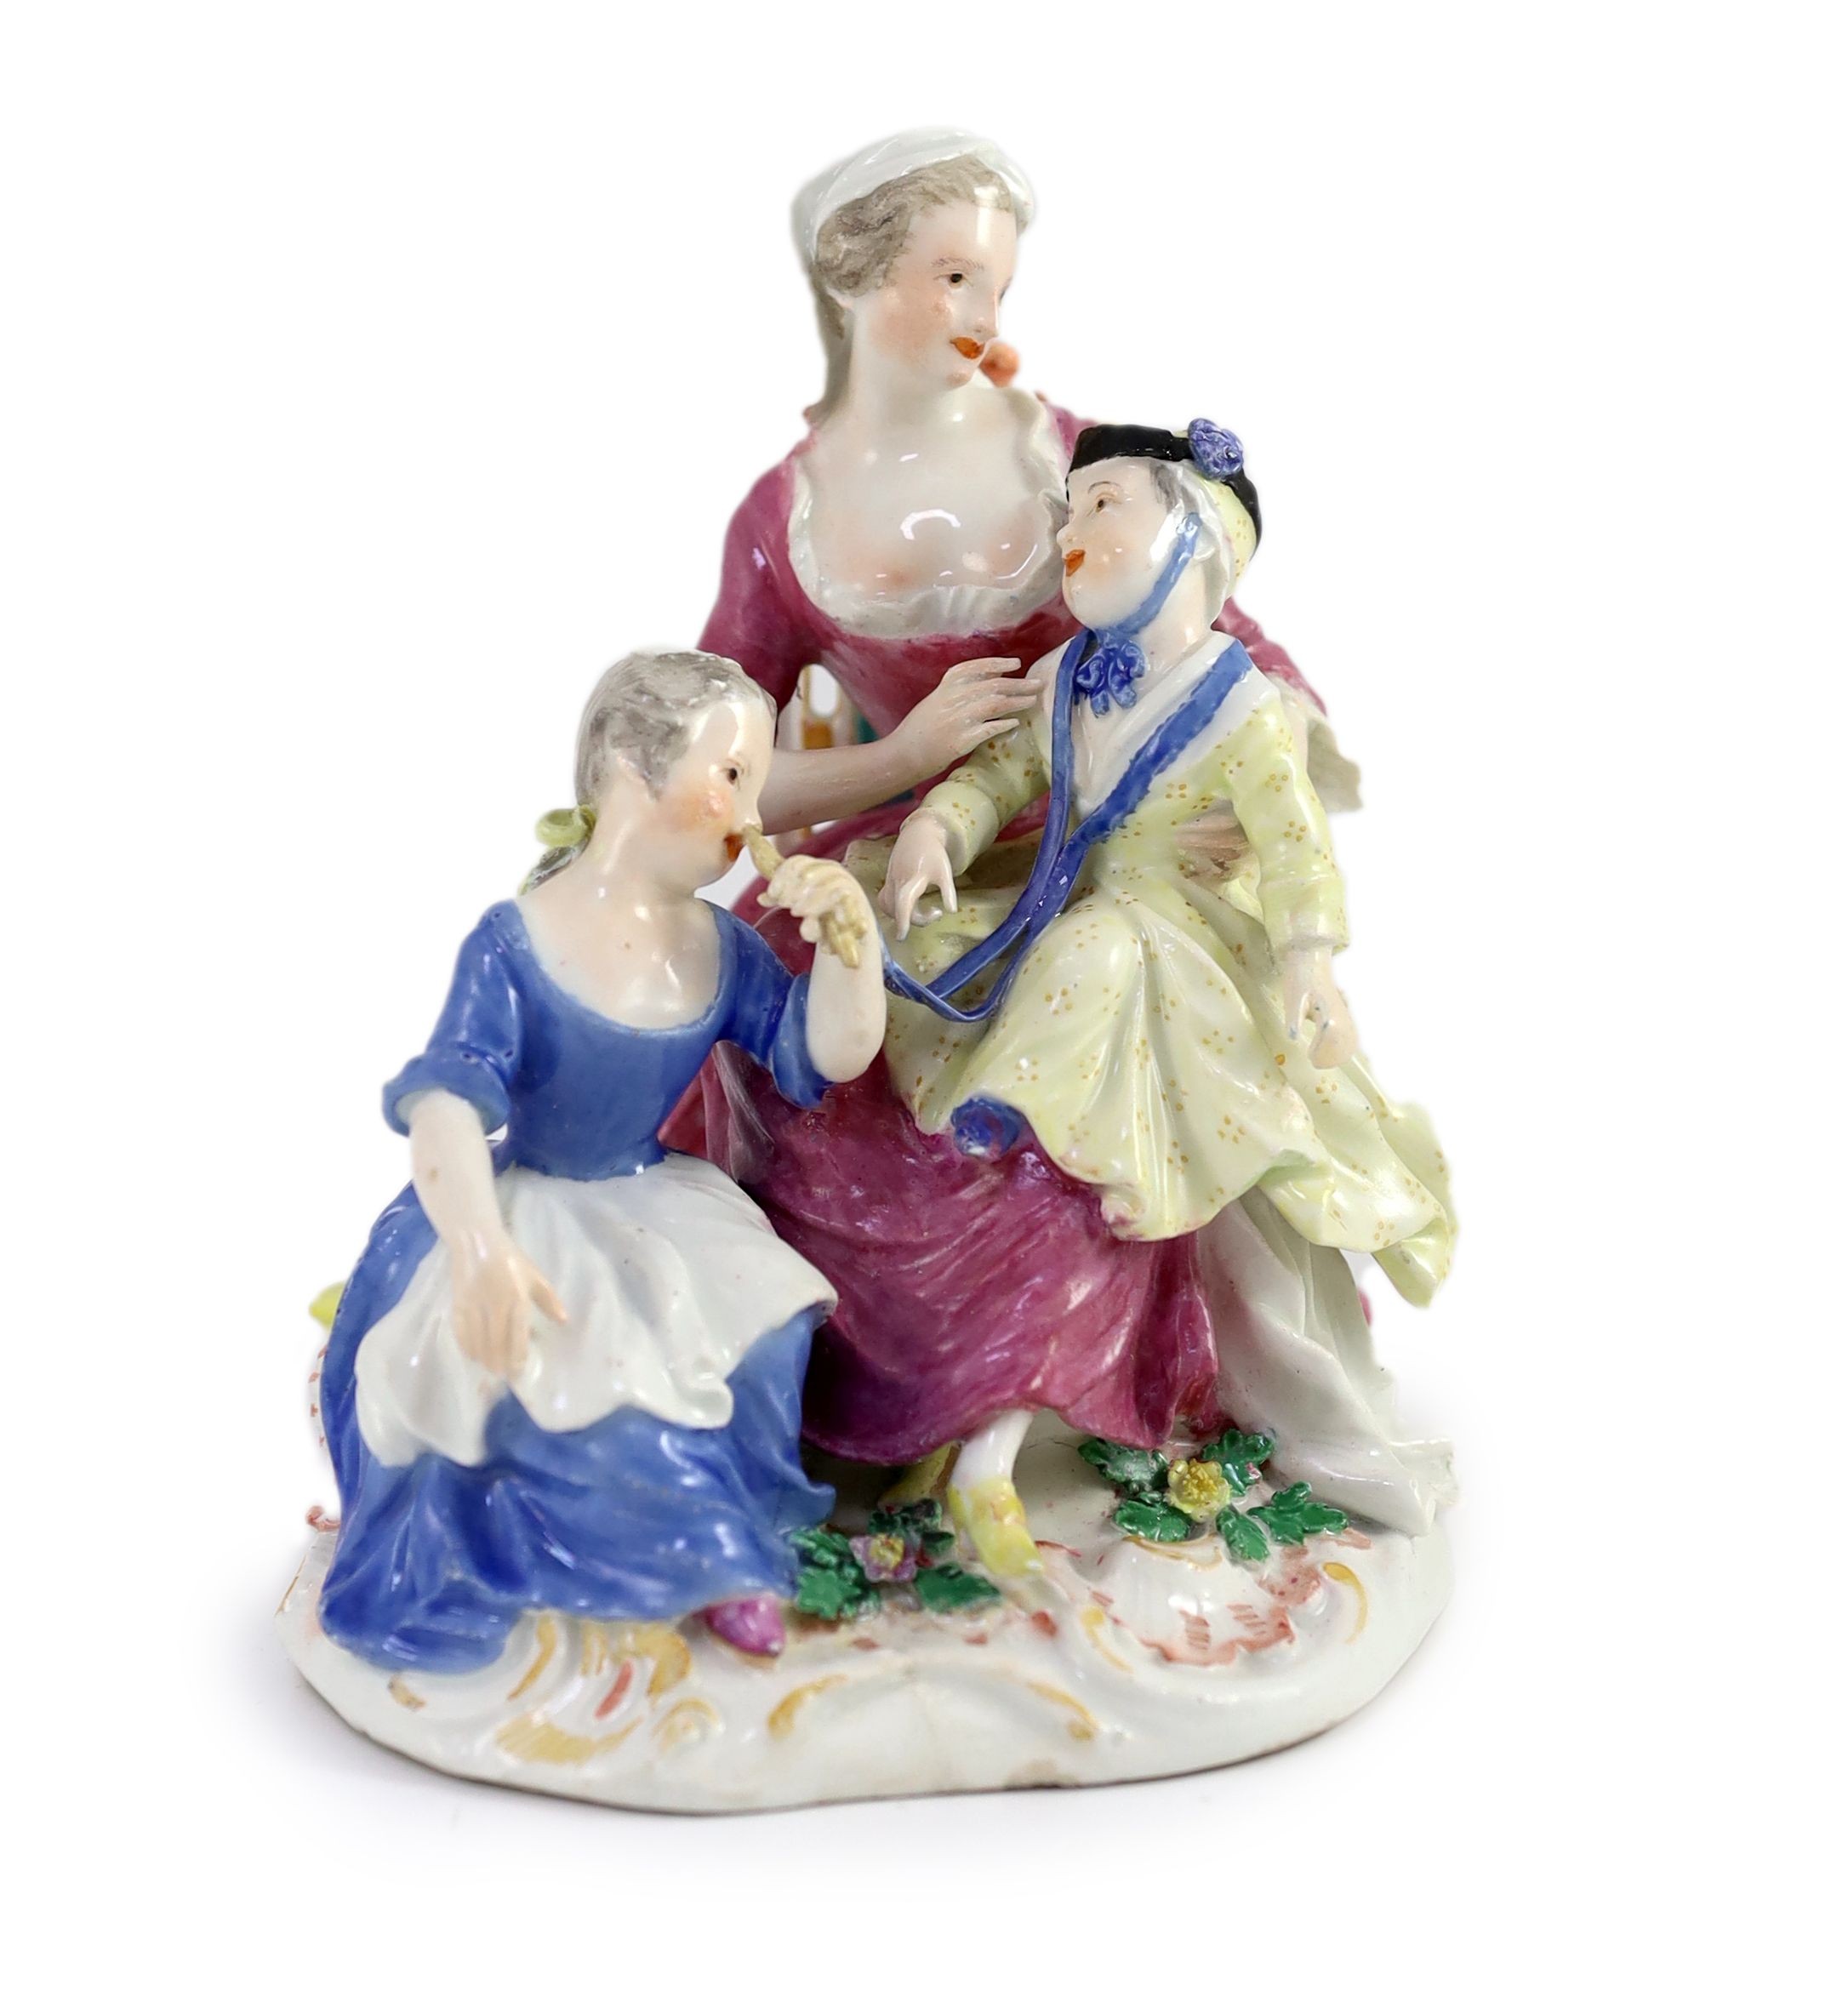 A Meissen group of a seated lady and two children, mid 18th centurymodelled by Kändler, crossed